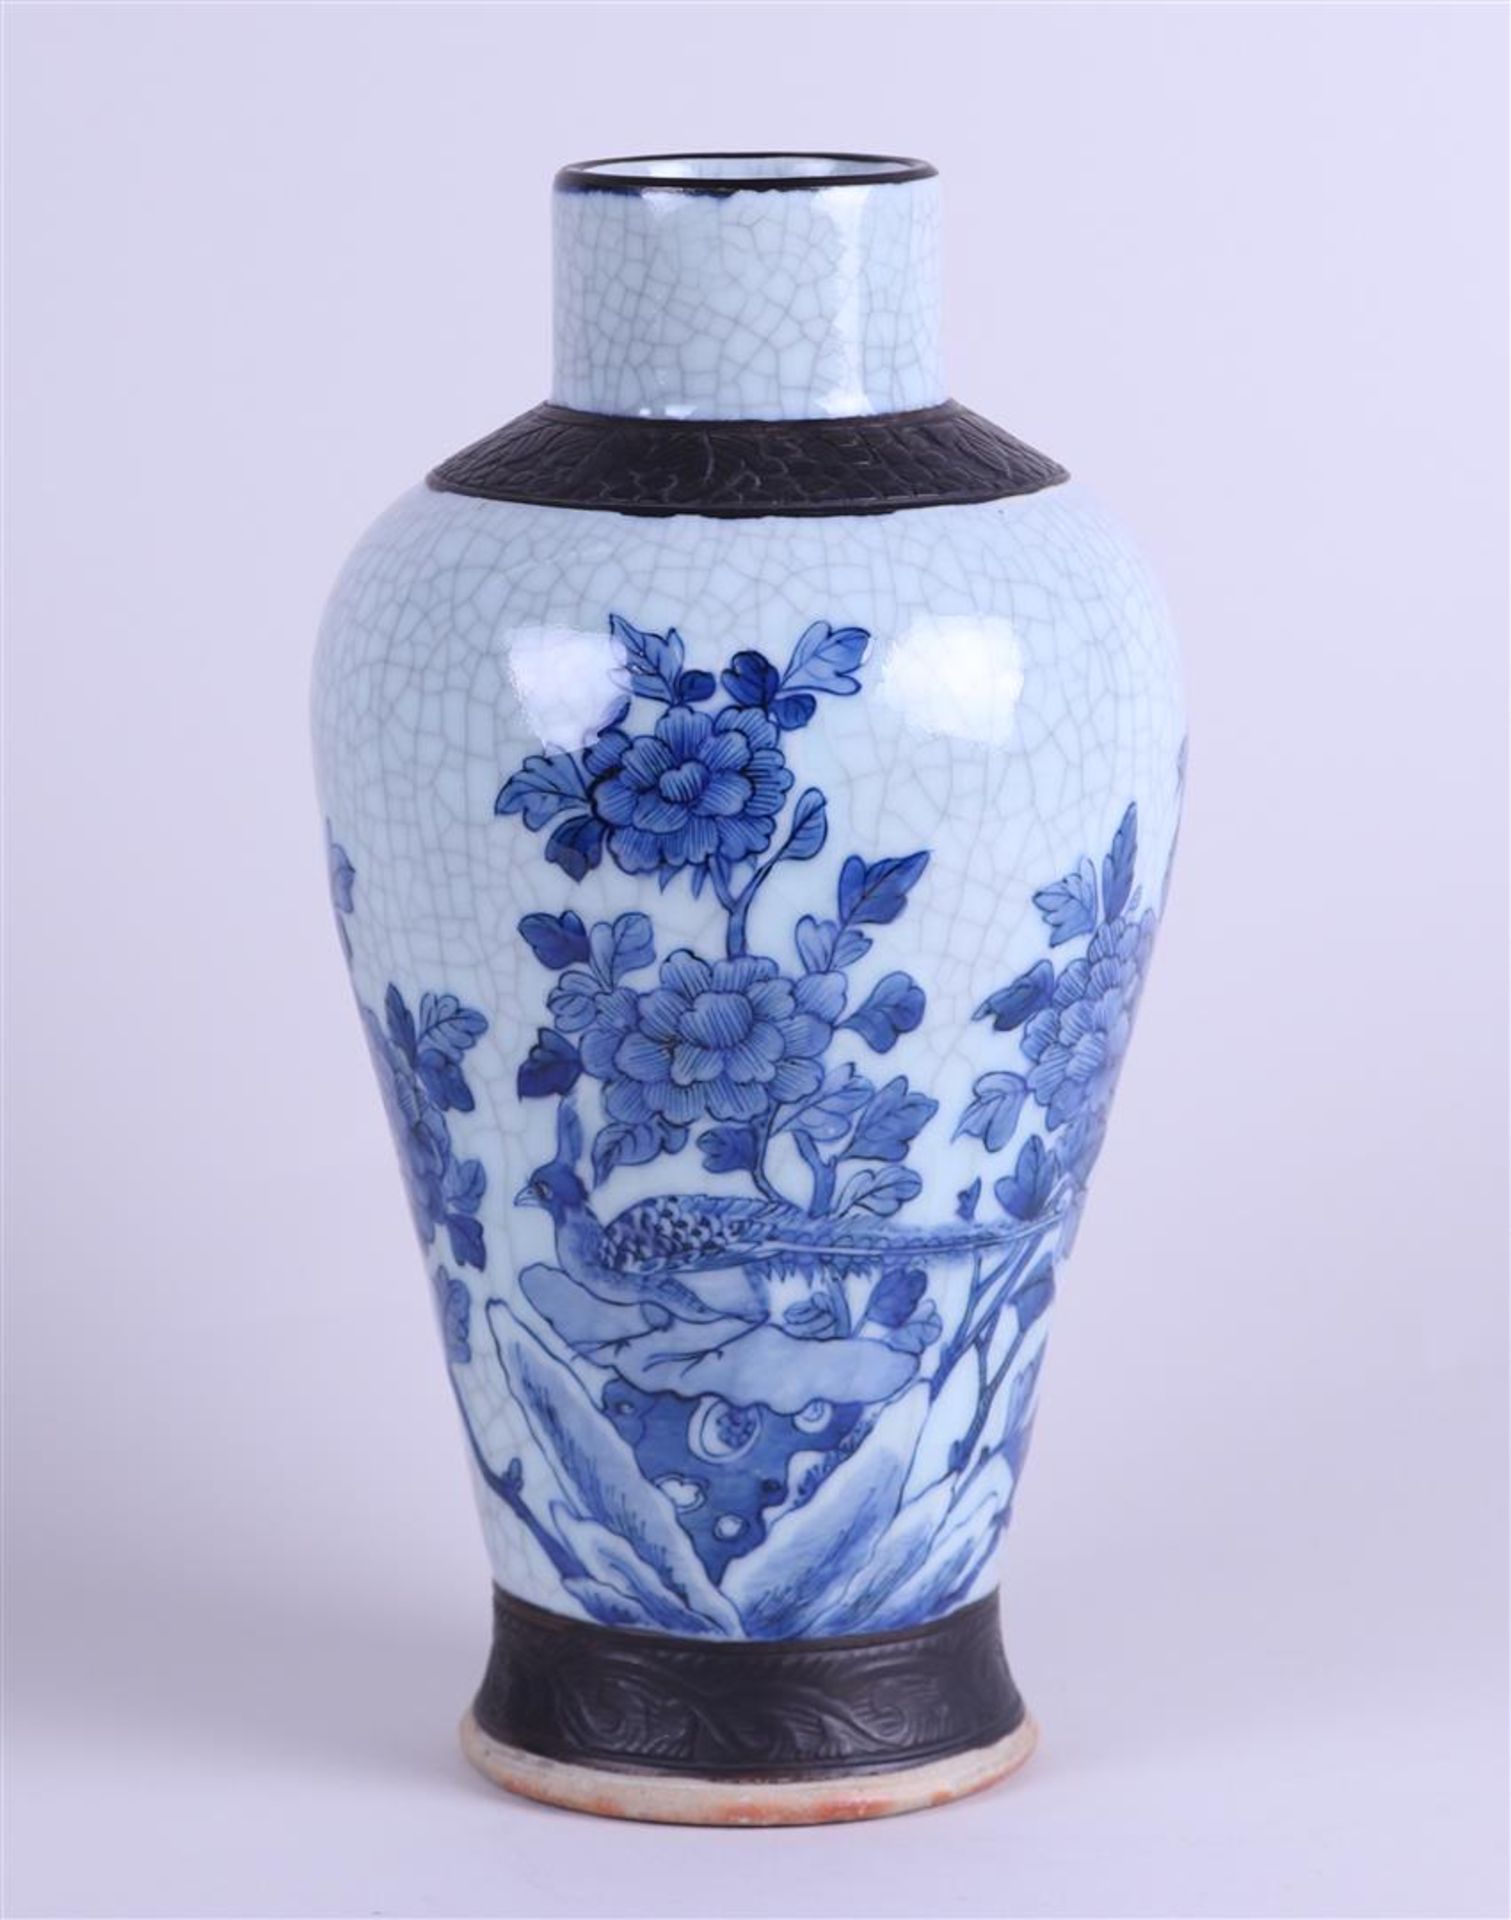 A Nakning pottery vase decorated with pheasant and flowers. China, circa 1900.